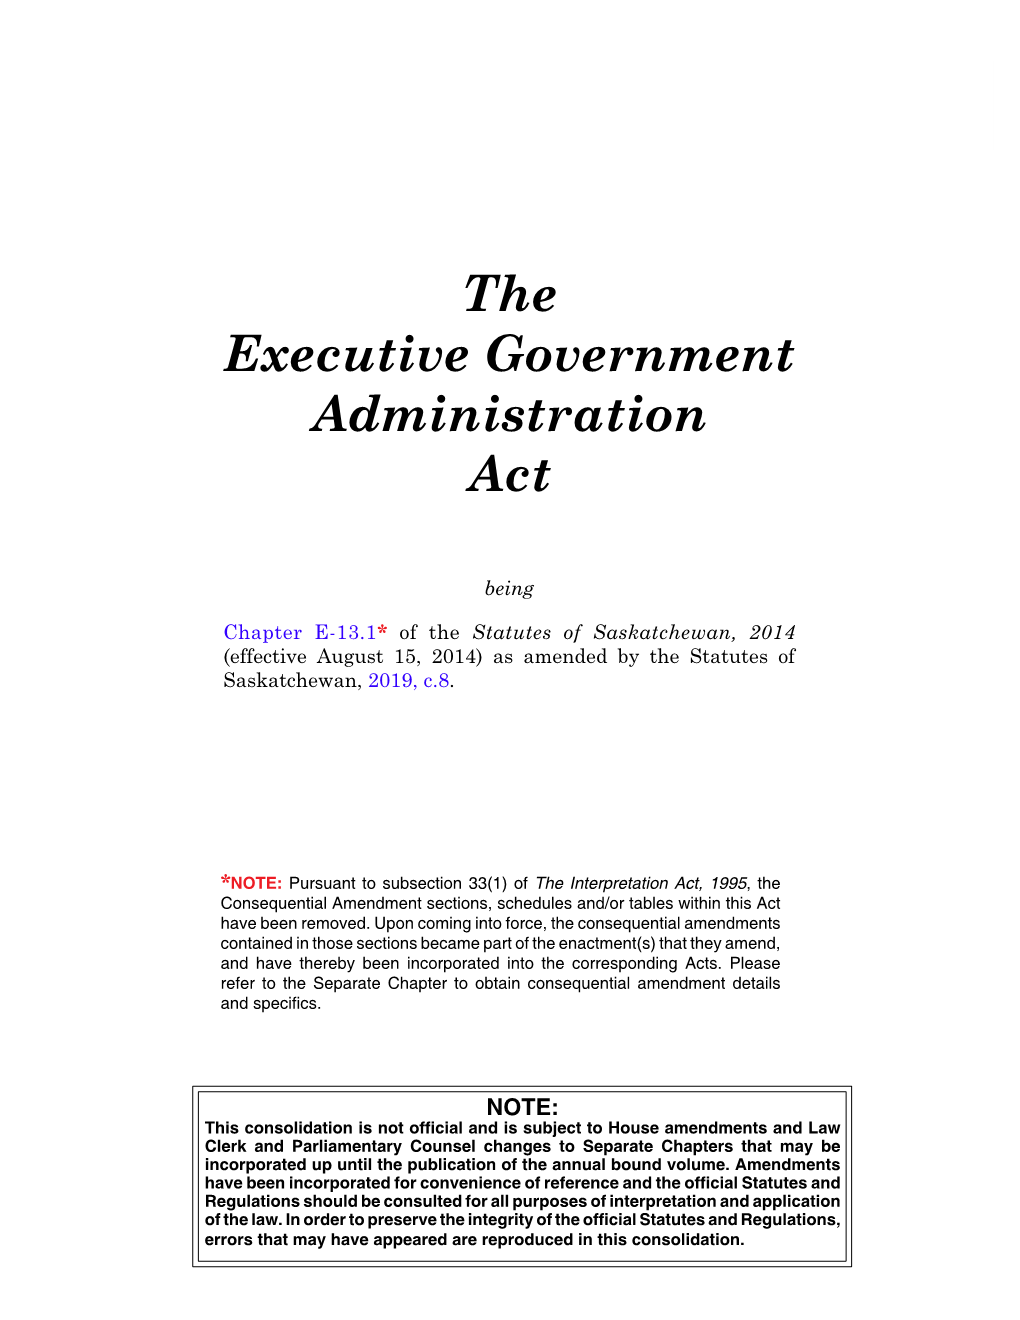 The Executive Government Administration Act